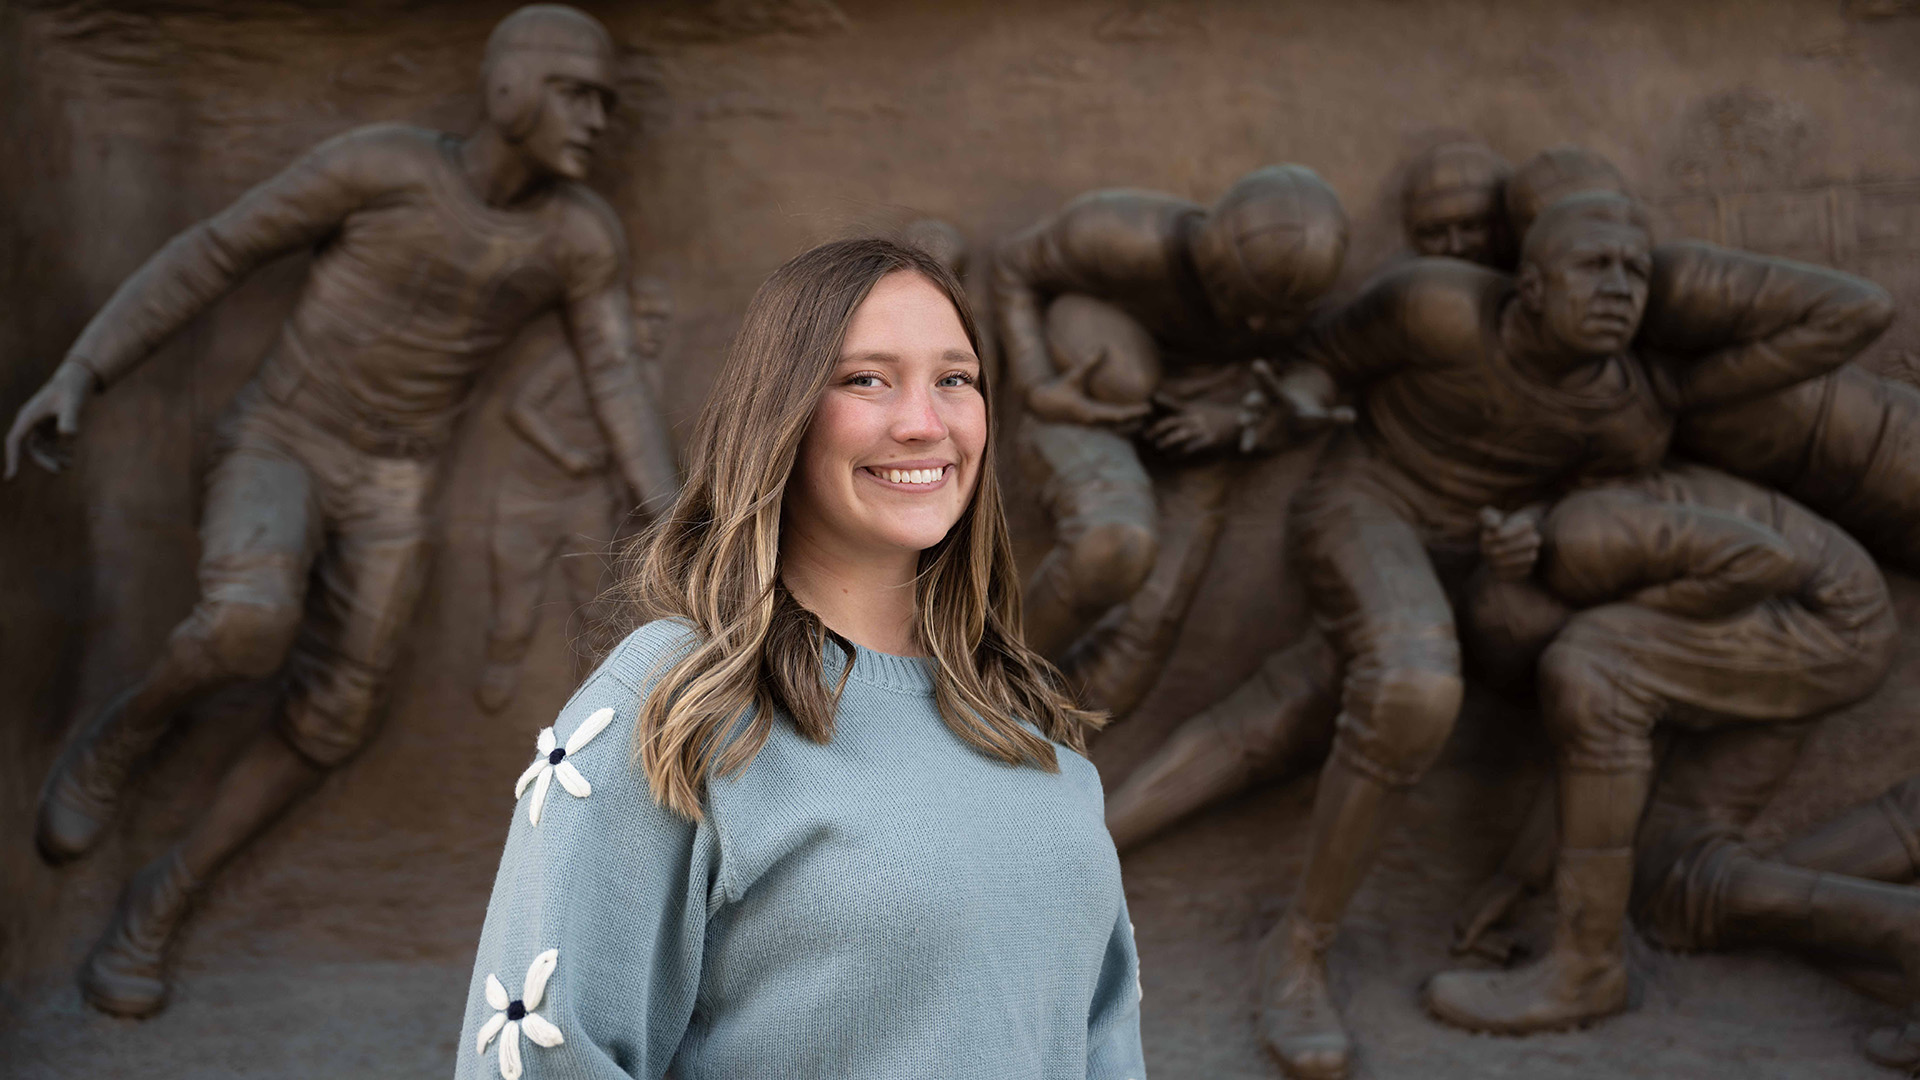 a woman standing in front of a sculpture featuring football players